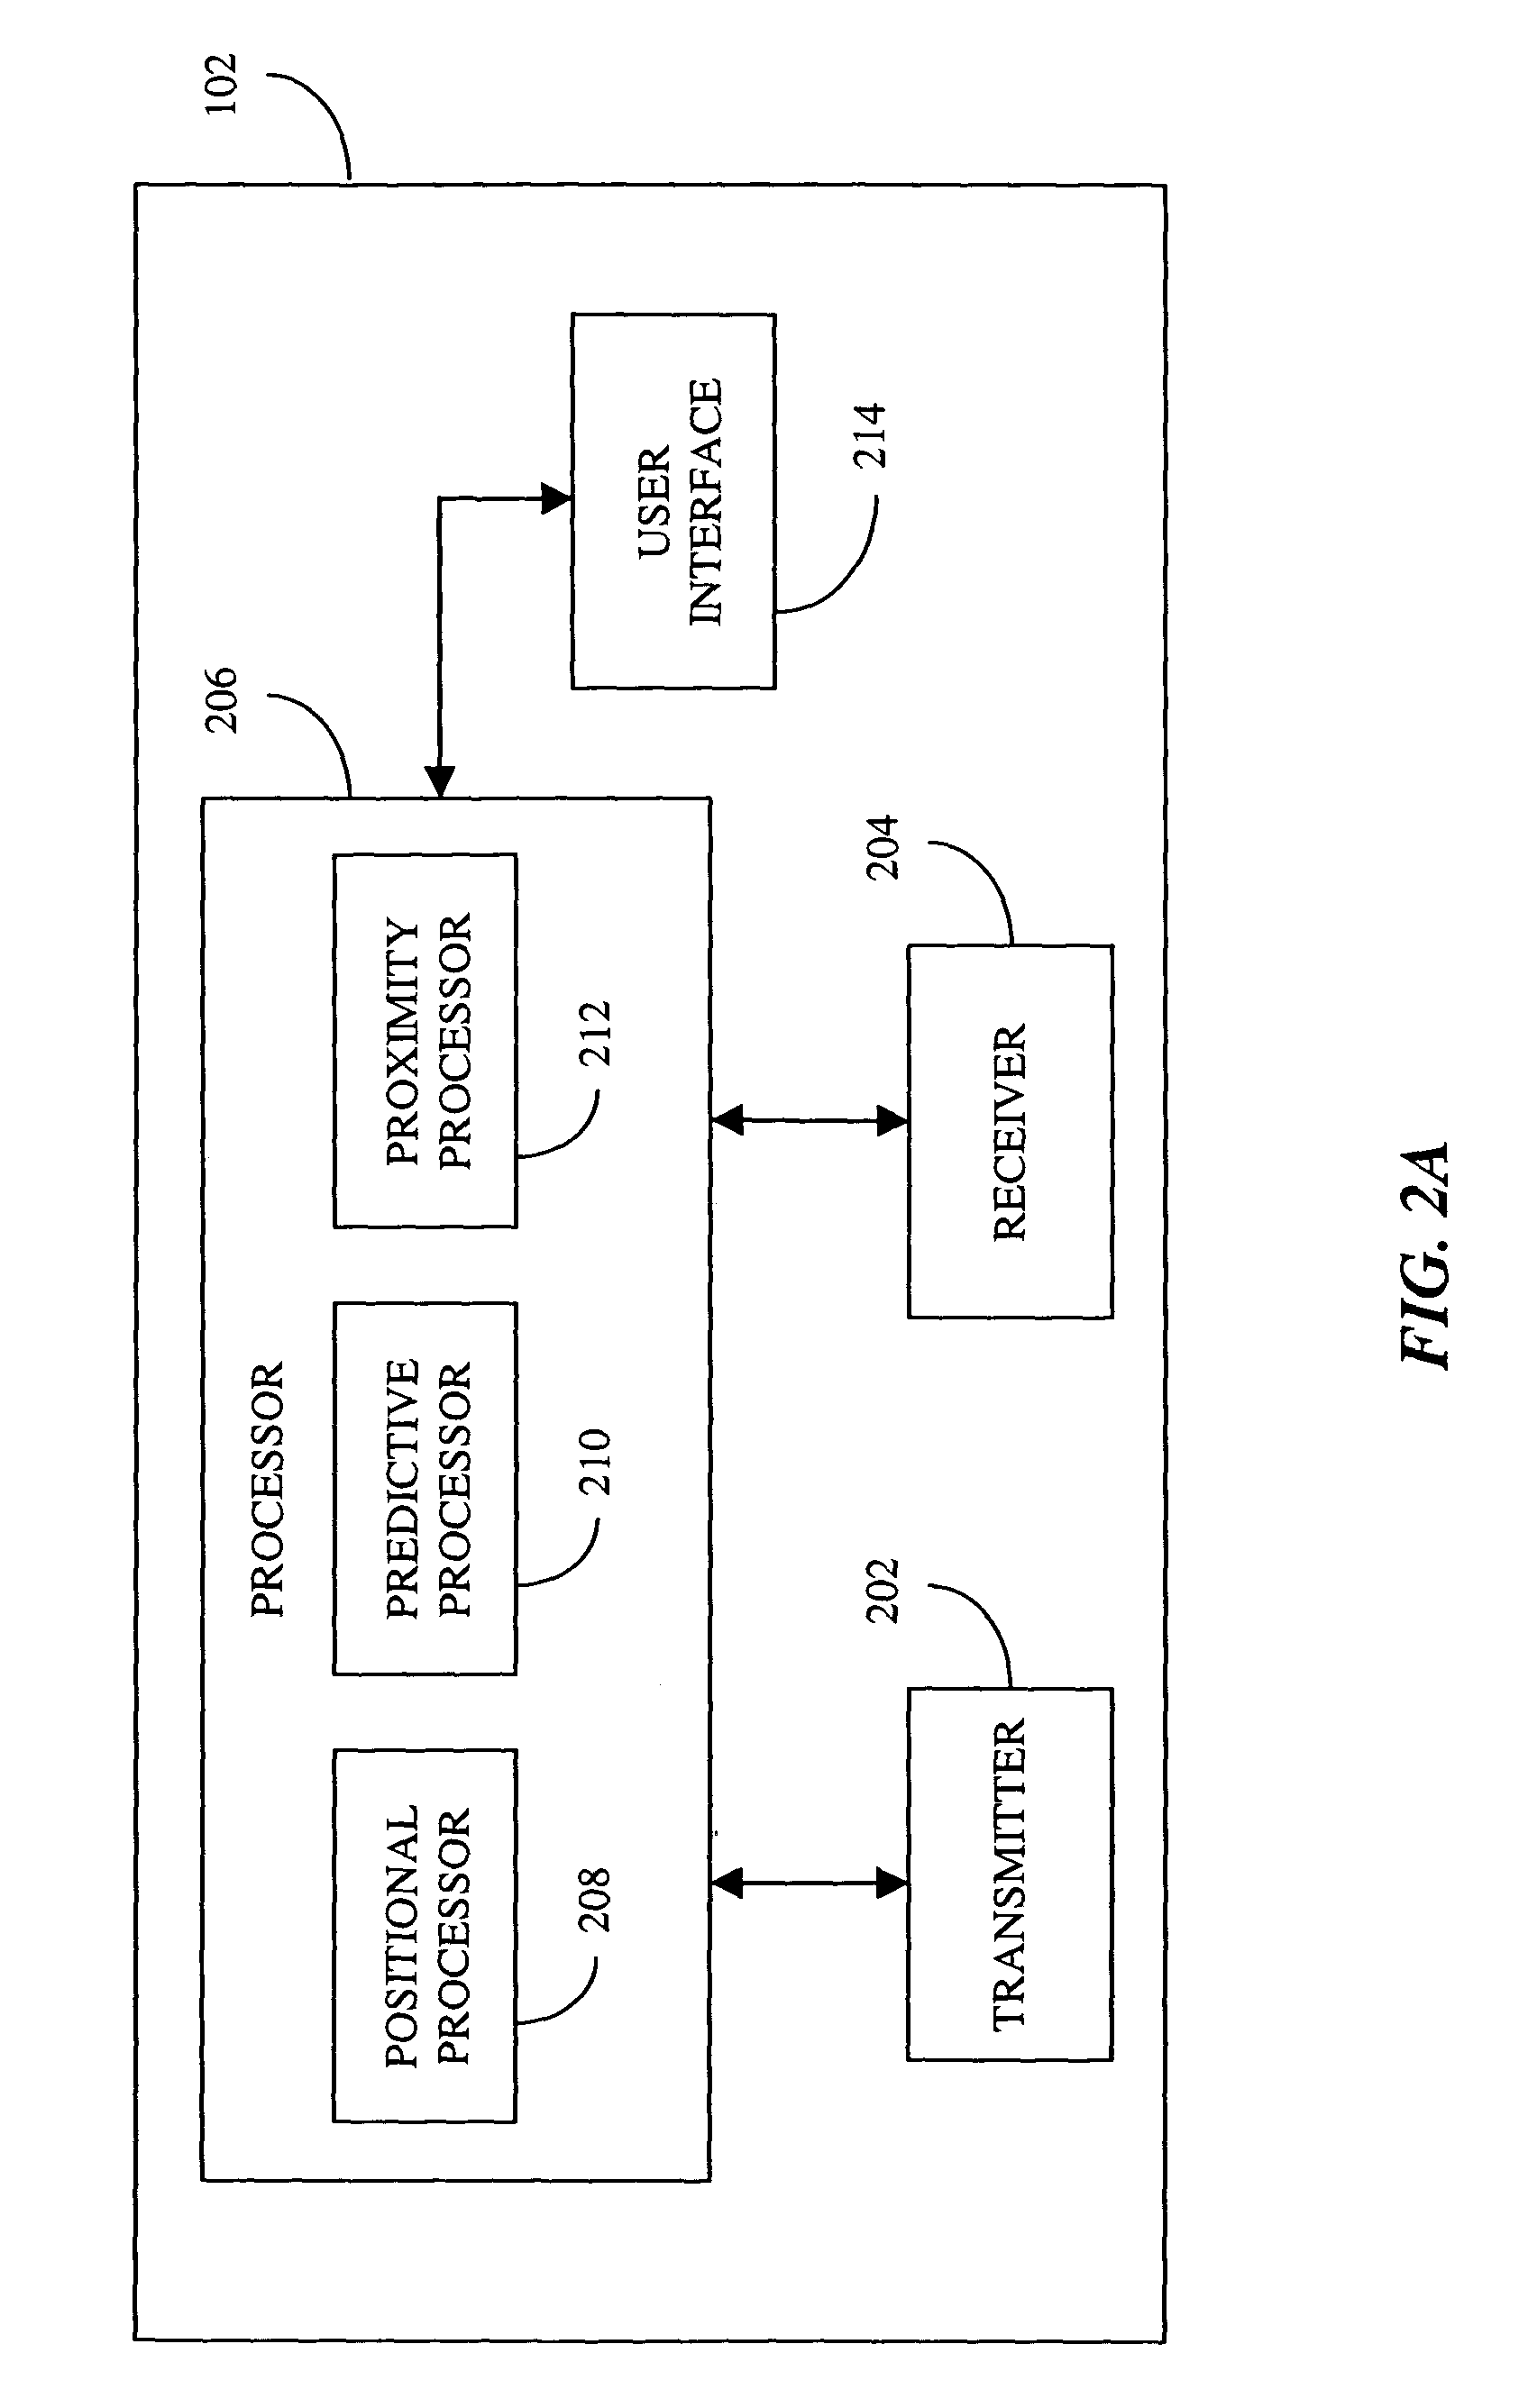 System and method for providing pedestrian alerts